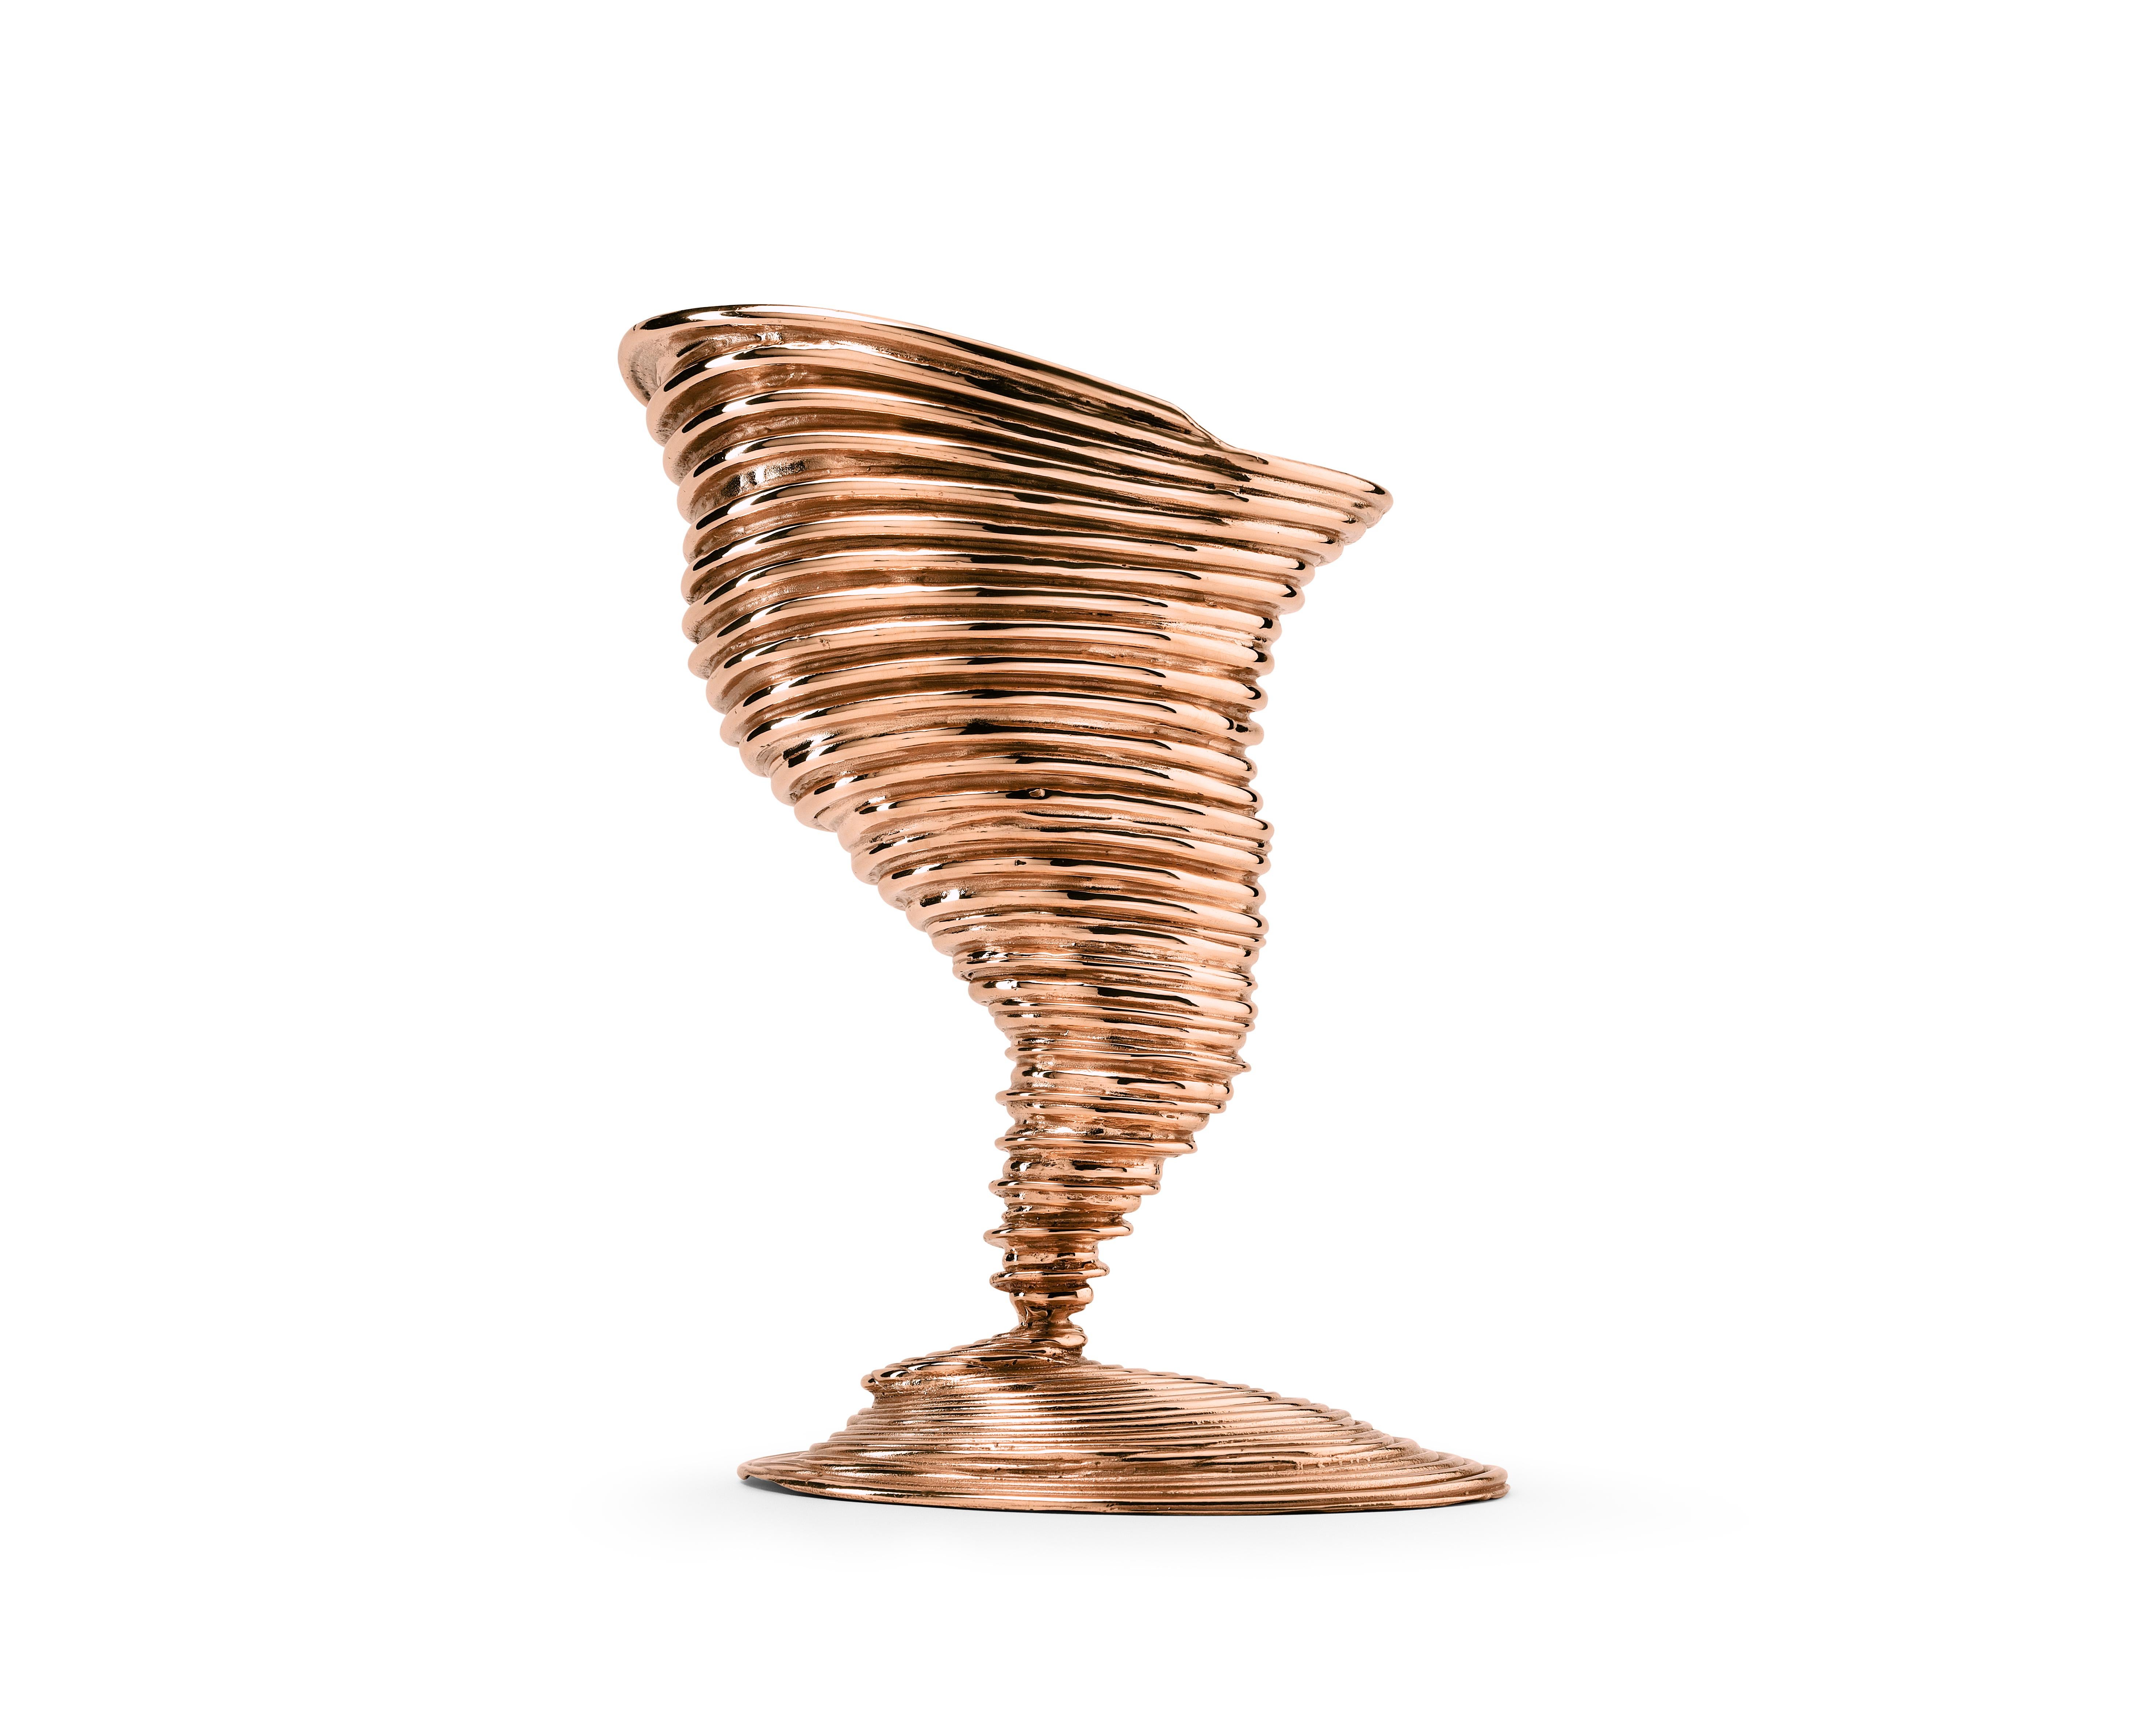 Italian Tornado Spiral Sculptural Vase in Bronze by Campana Brothers For Sale